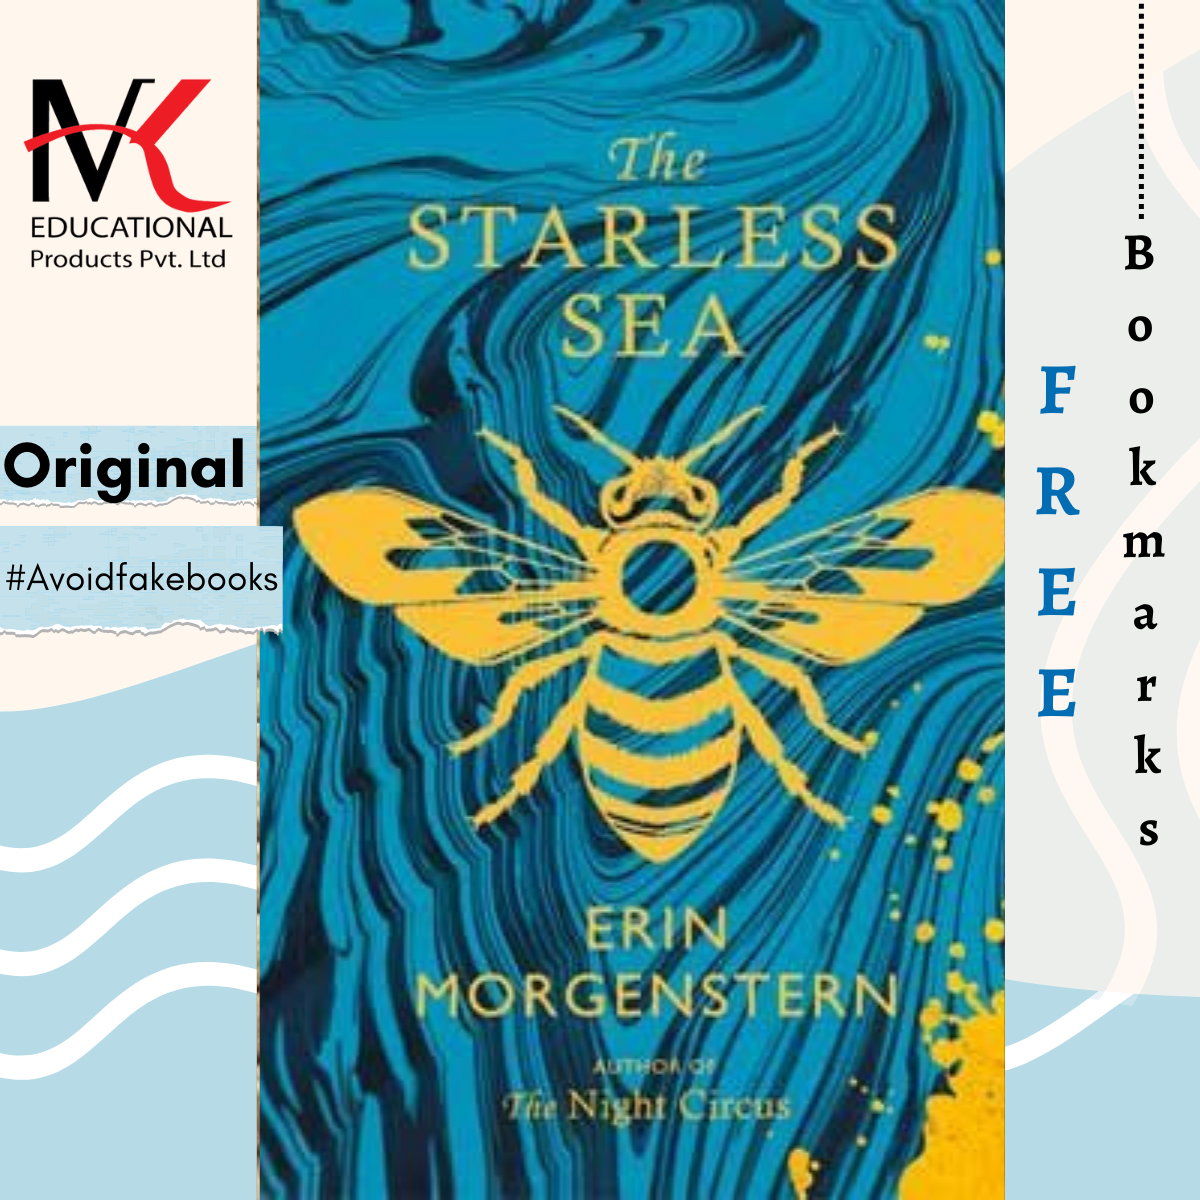 The　Sea　Morgenstern　Starless　Erin　(MKEP)